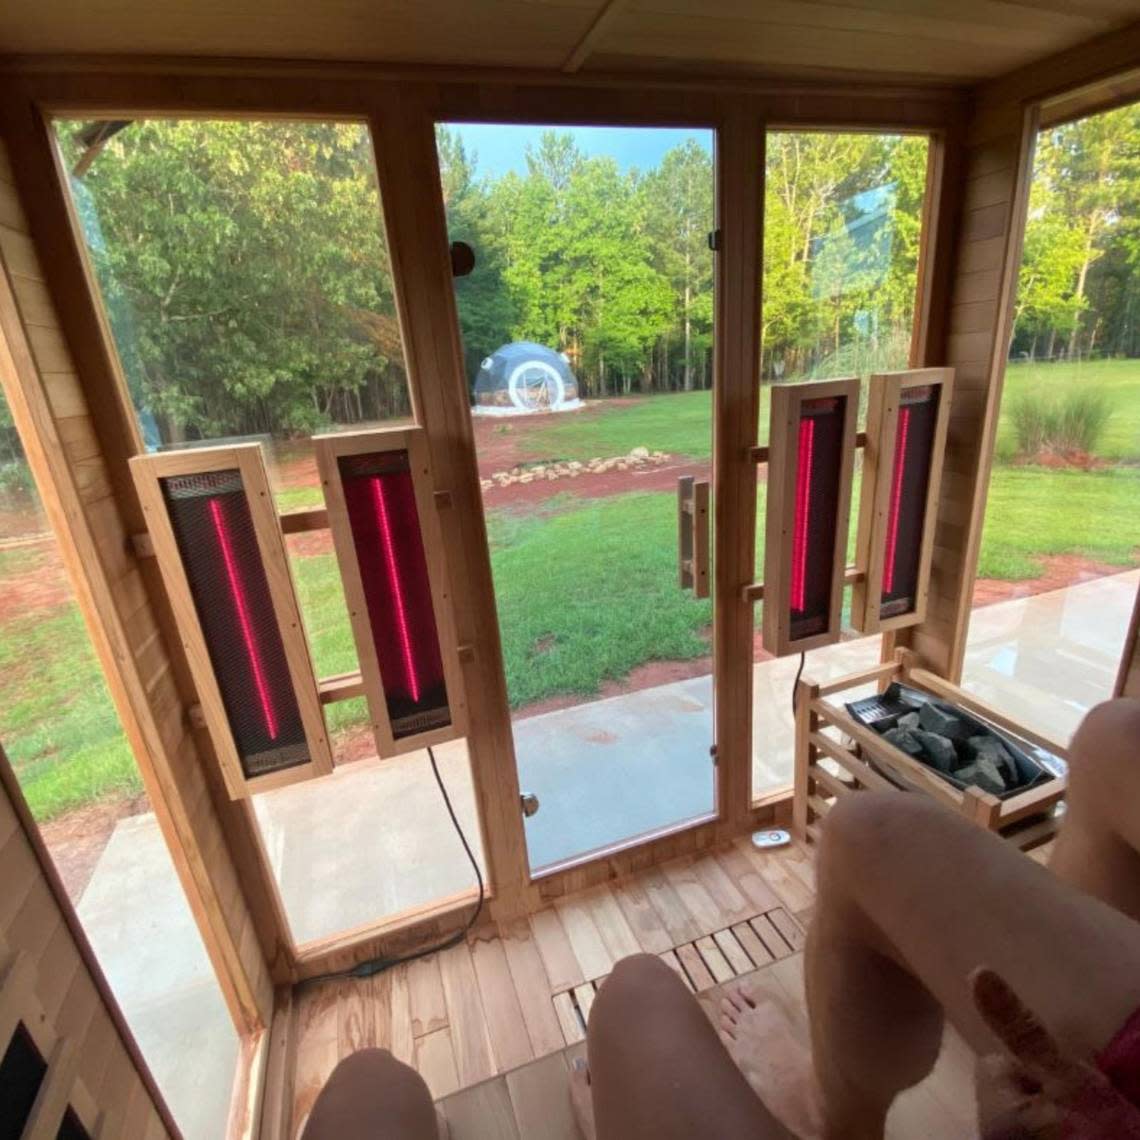 Guests enjoy a view of the peaceful outdoors while relaxing in an infra-red sauna at The Florrest in Hillsboro, GA. Courtesy The Florrest